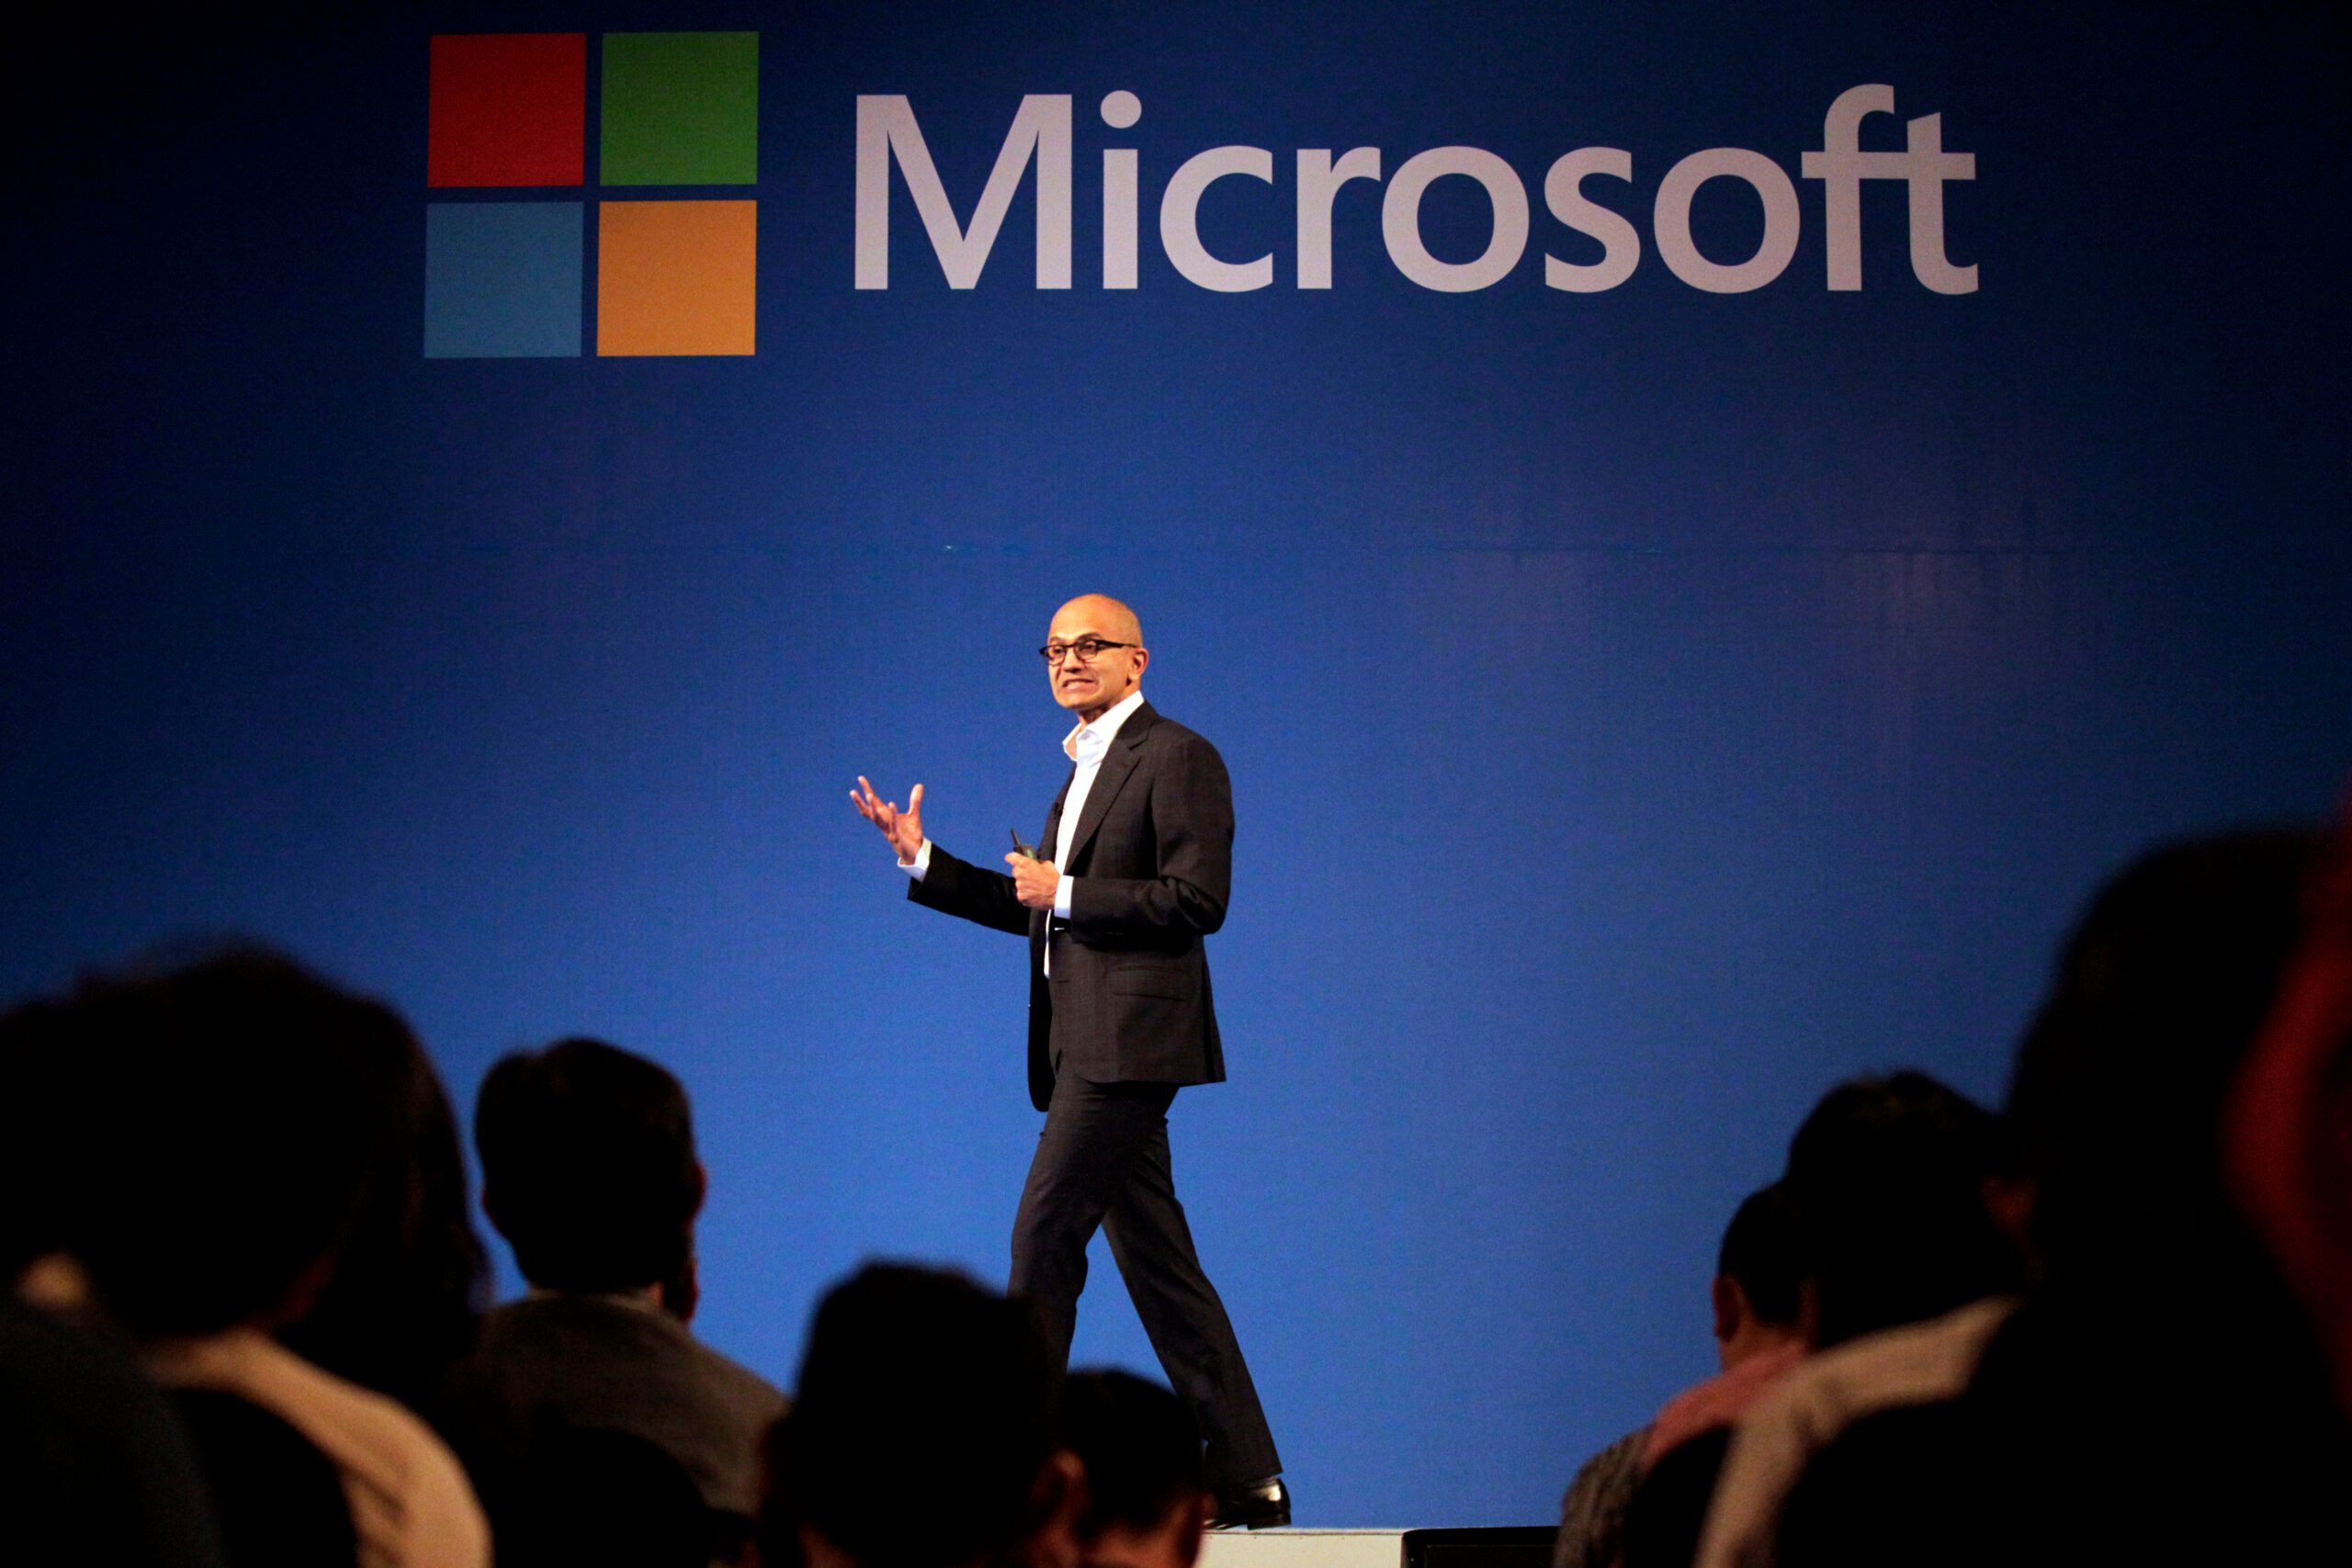 Microsoft delivers earnings surprise, stock rises